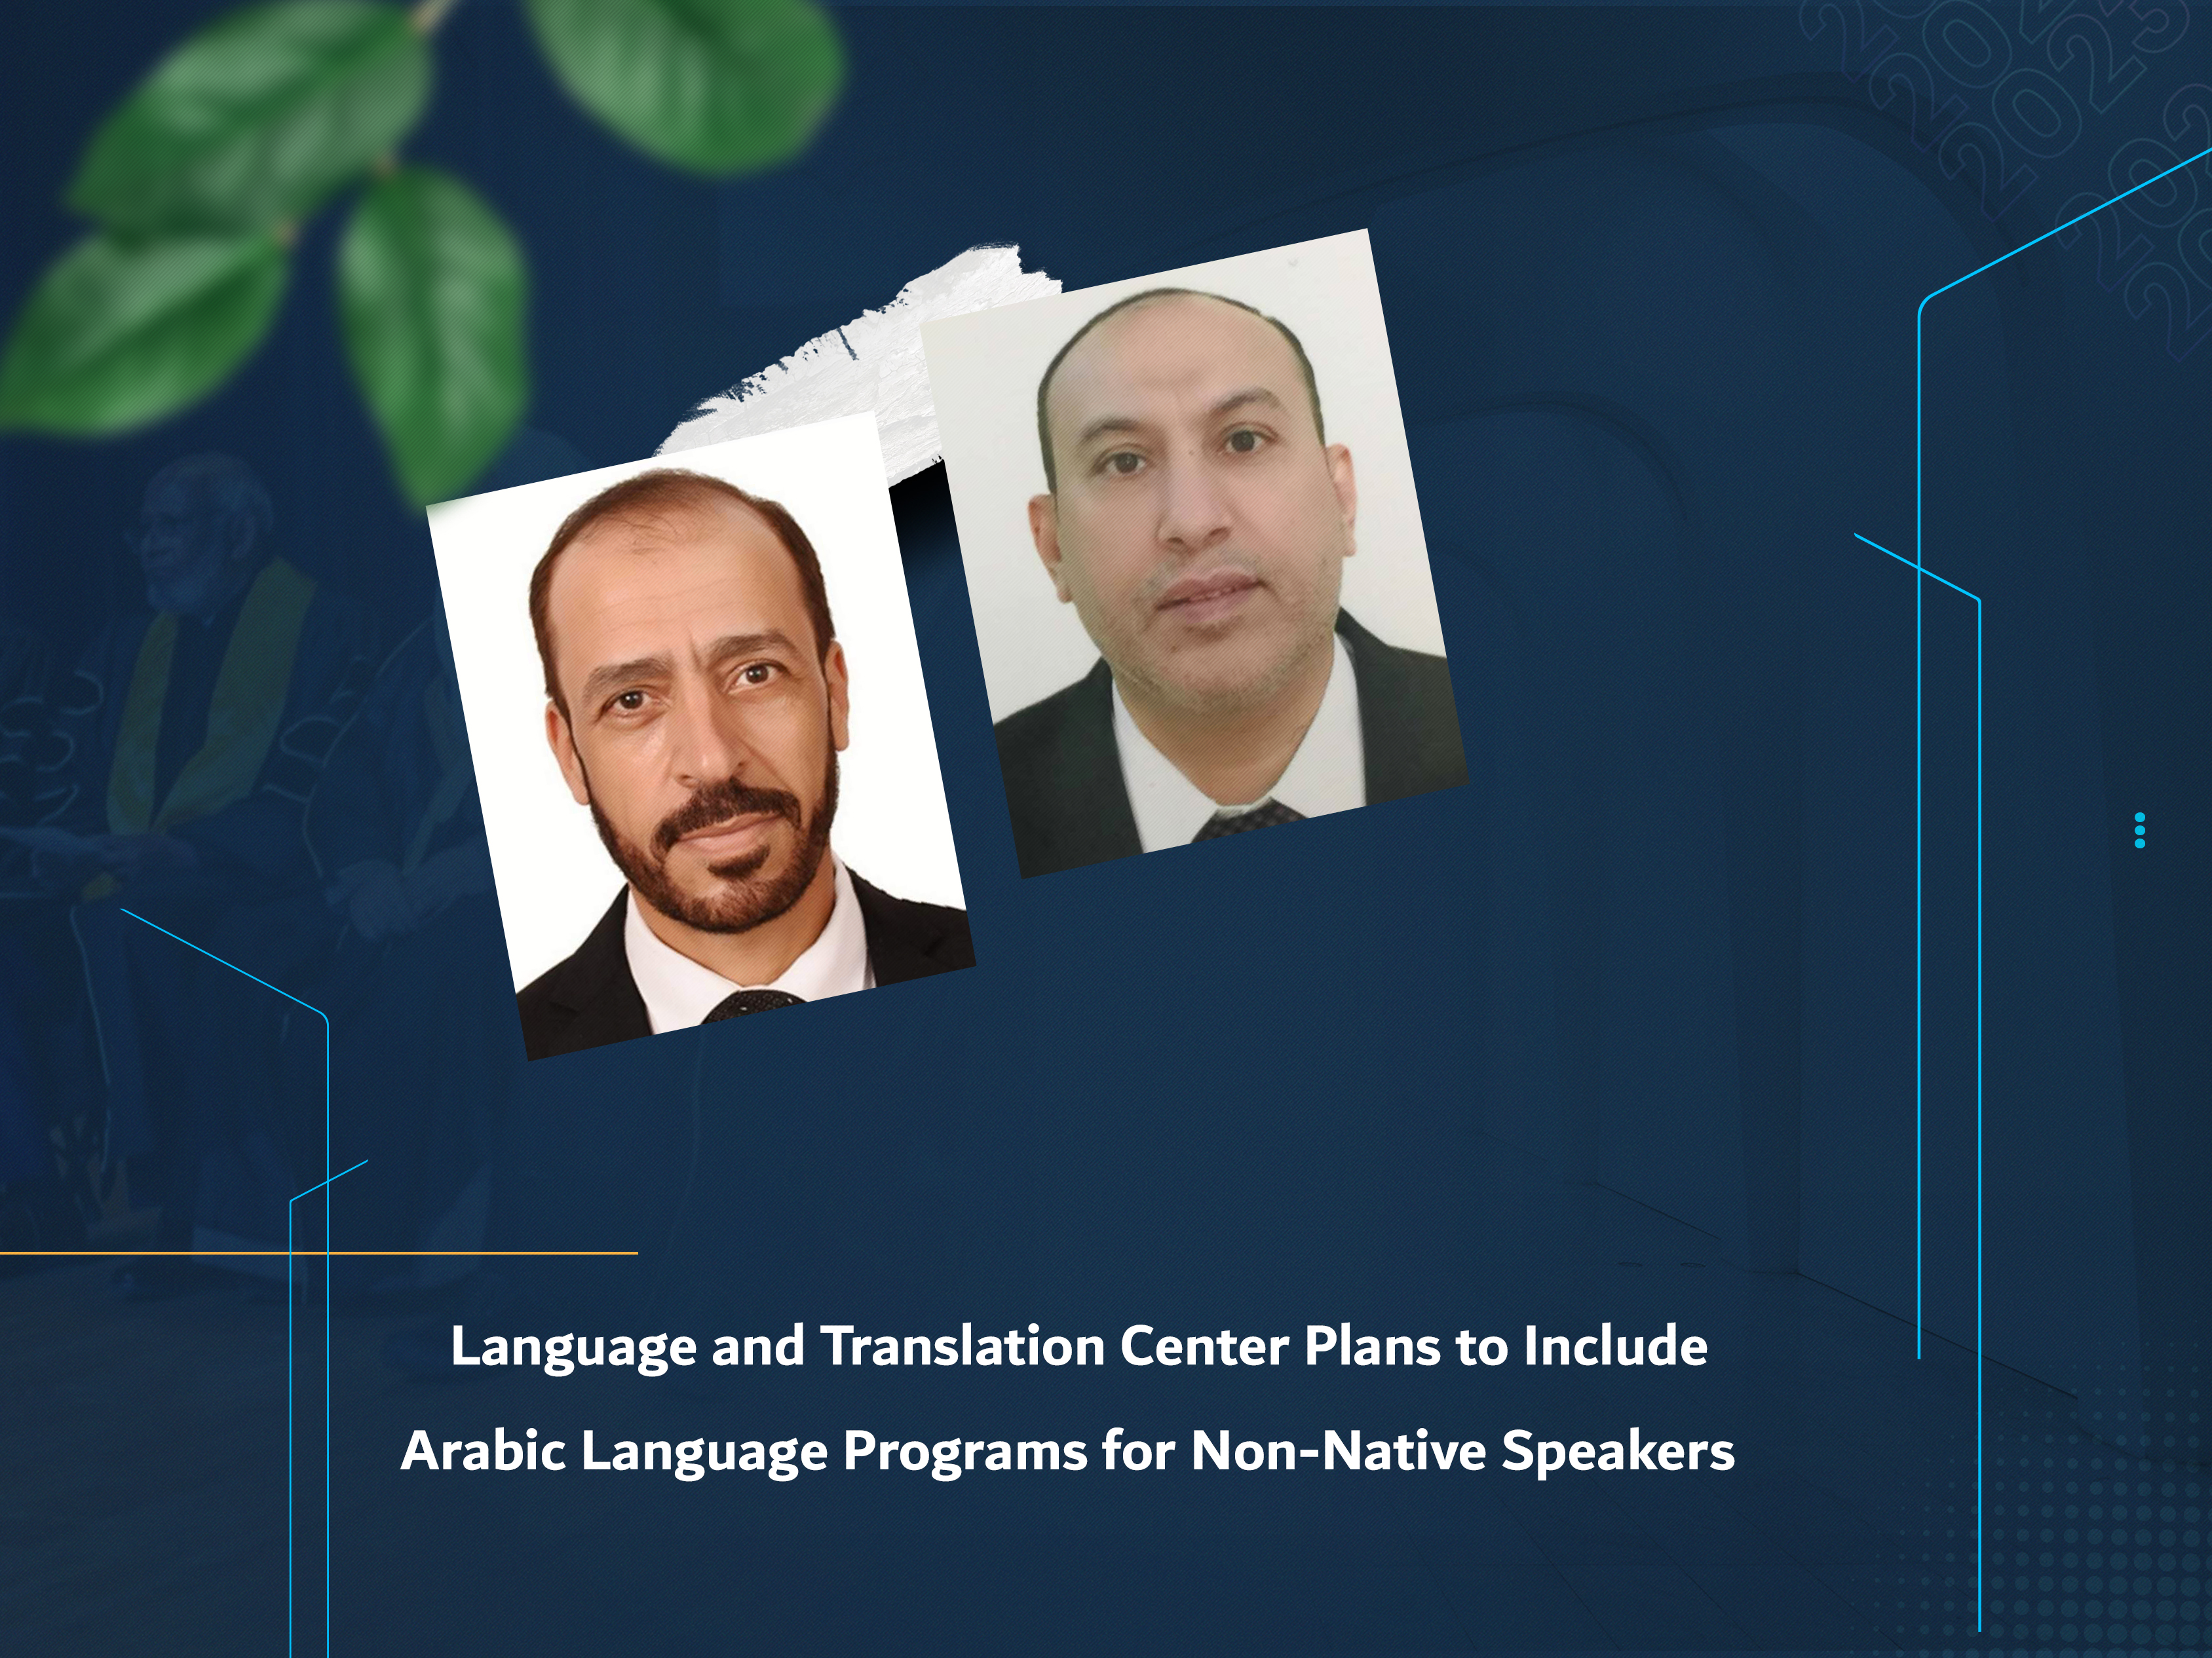 Language and Translation Center Plans to Include Arabic Language Programs for Non-Native Speakers